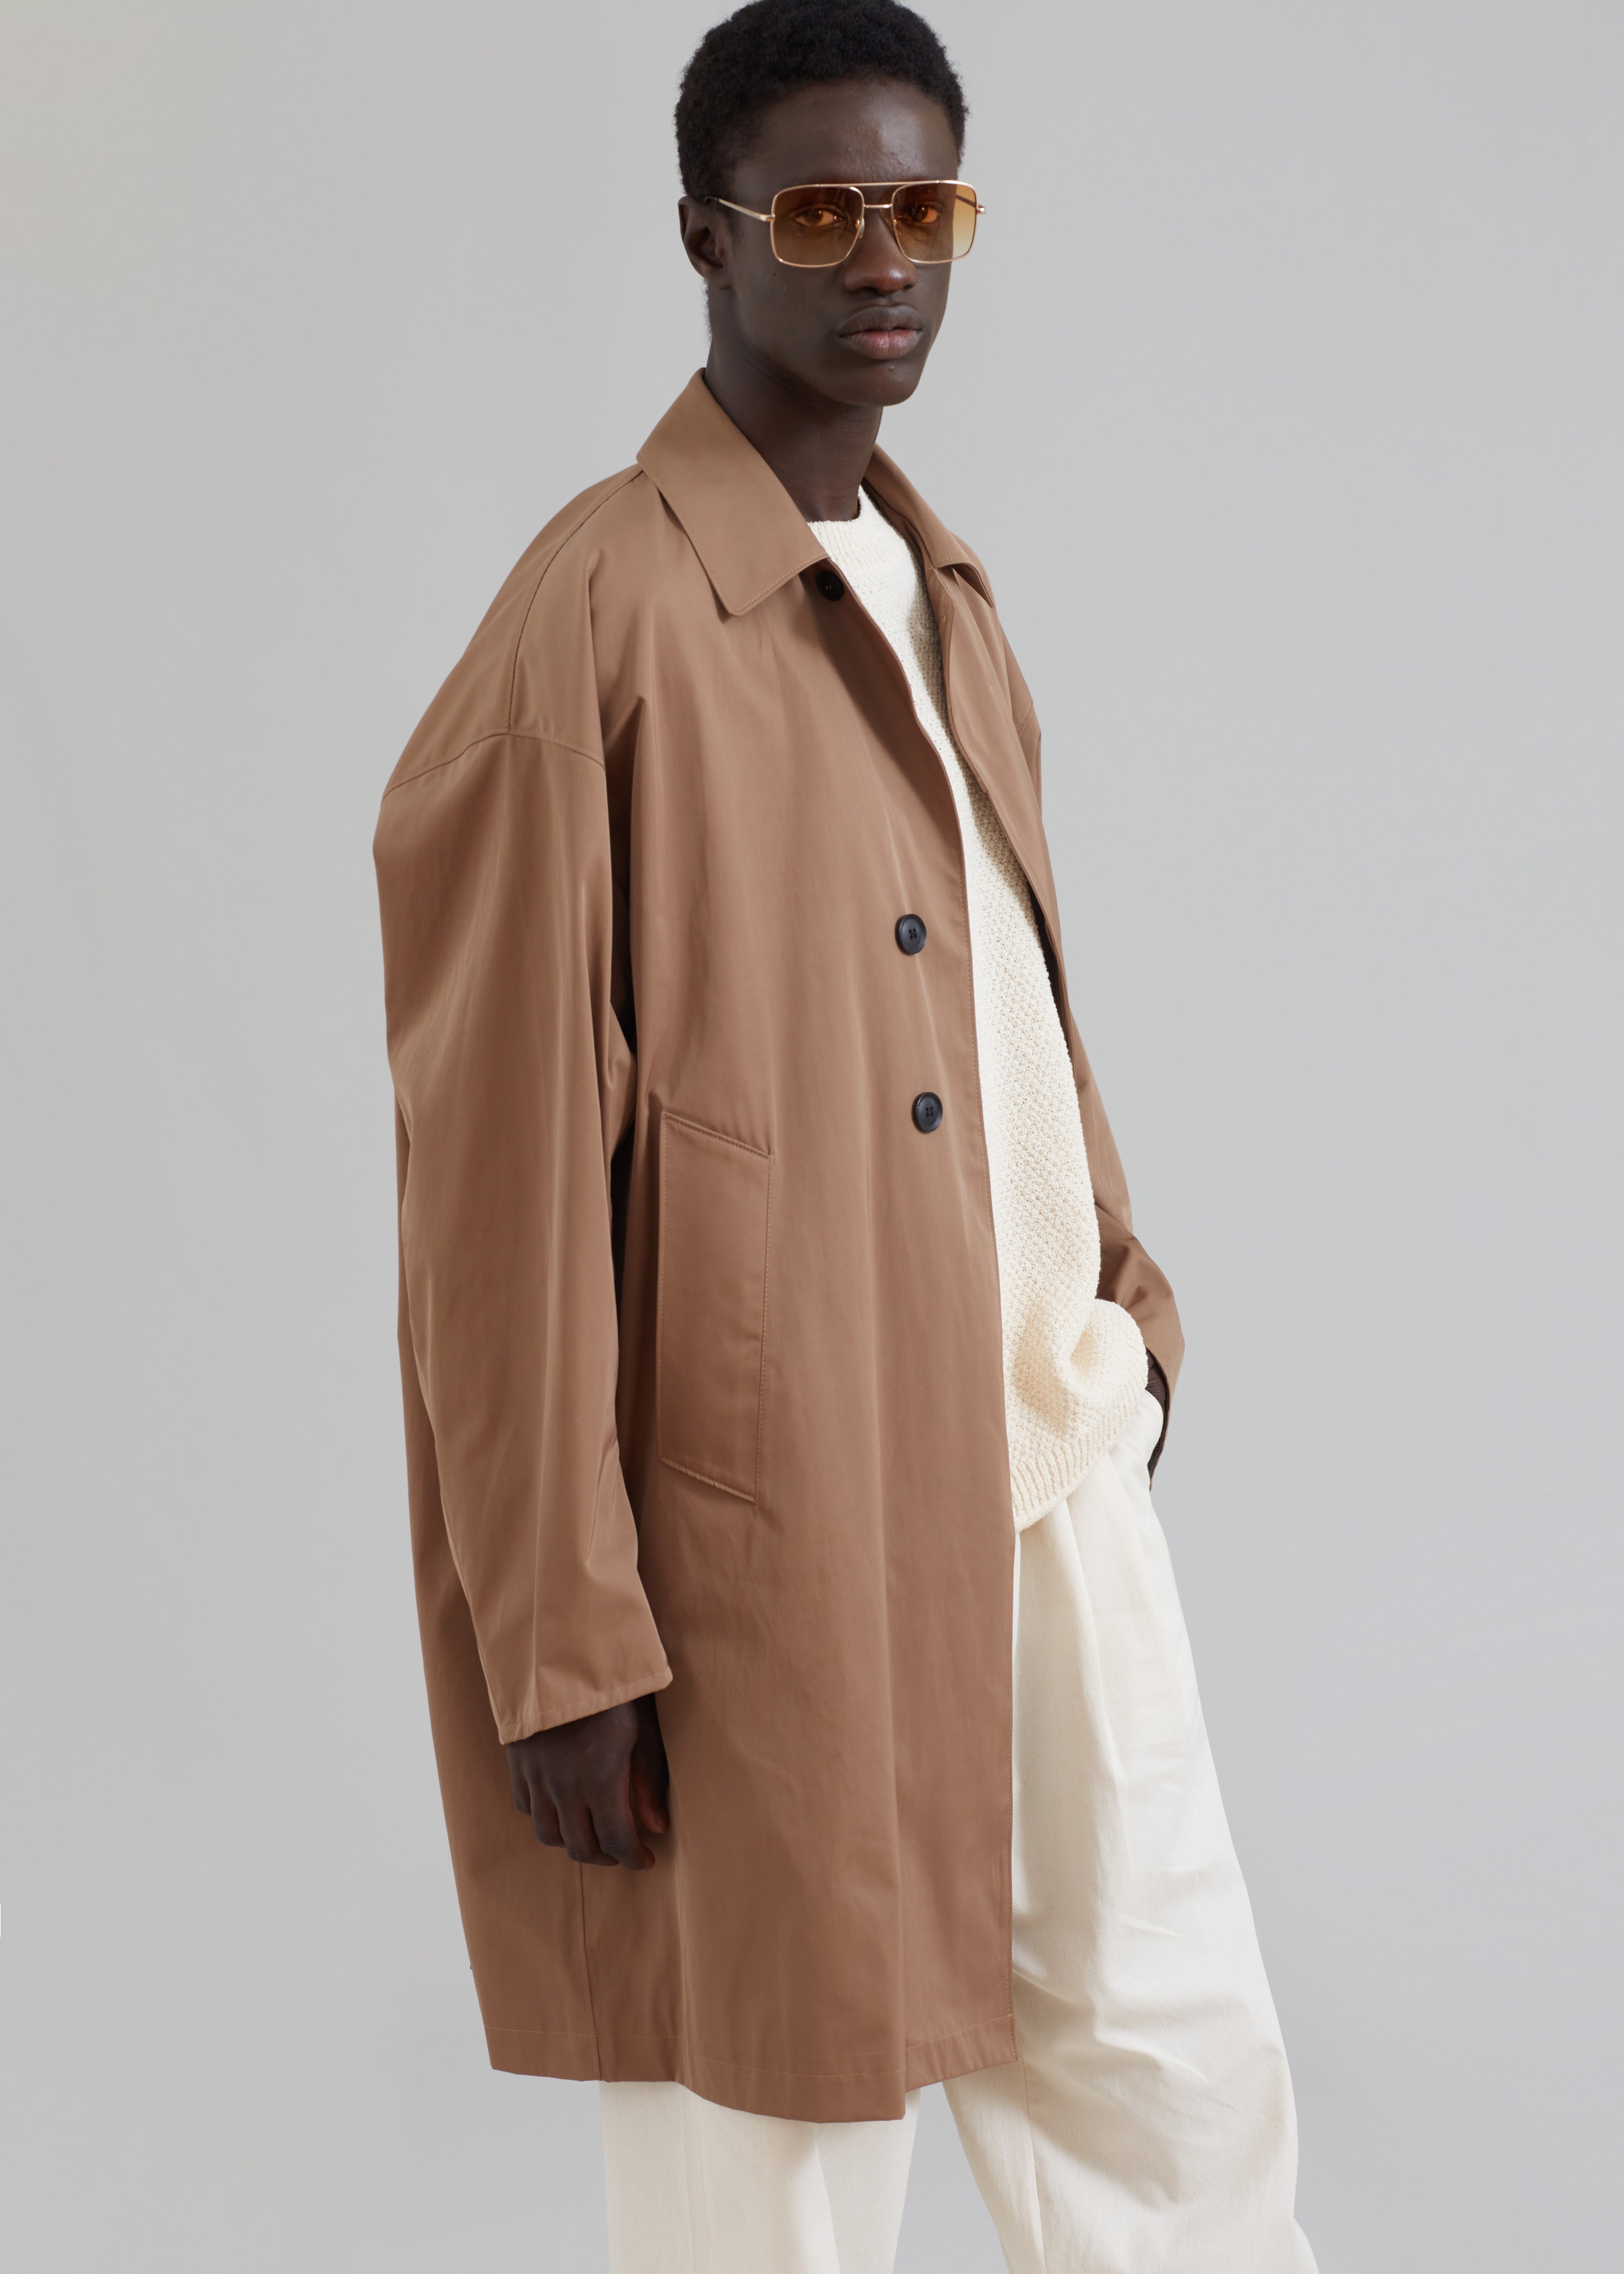 Peter Trench Coat - Beige – The Frankie Shop